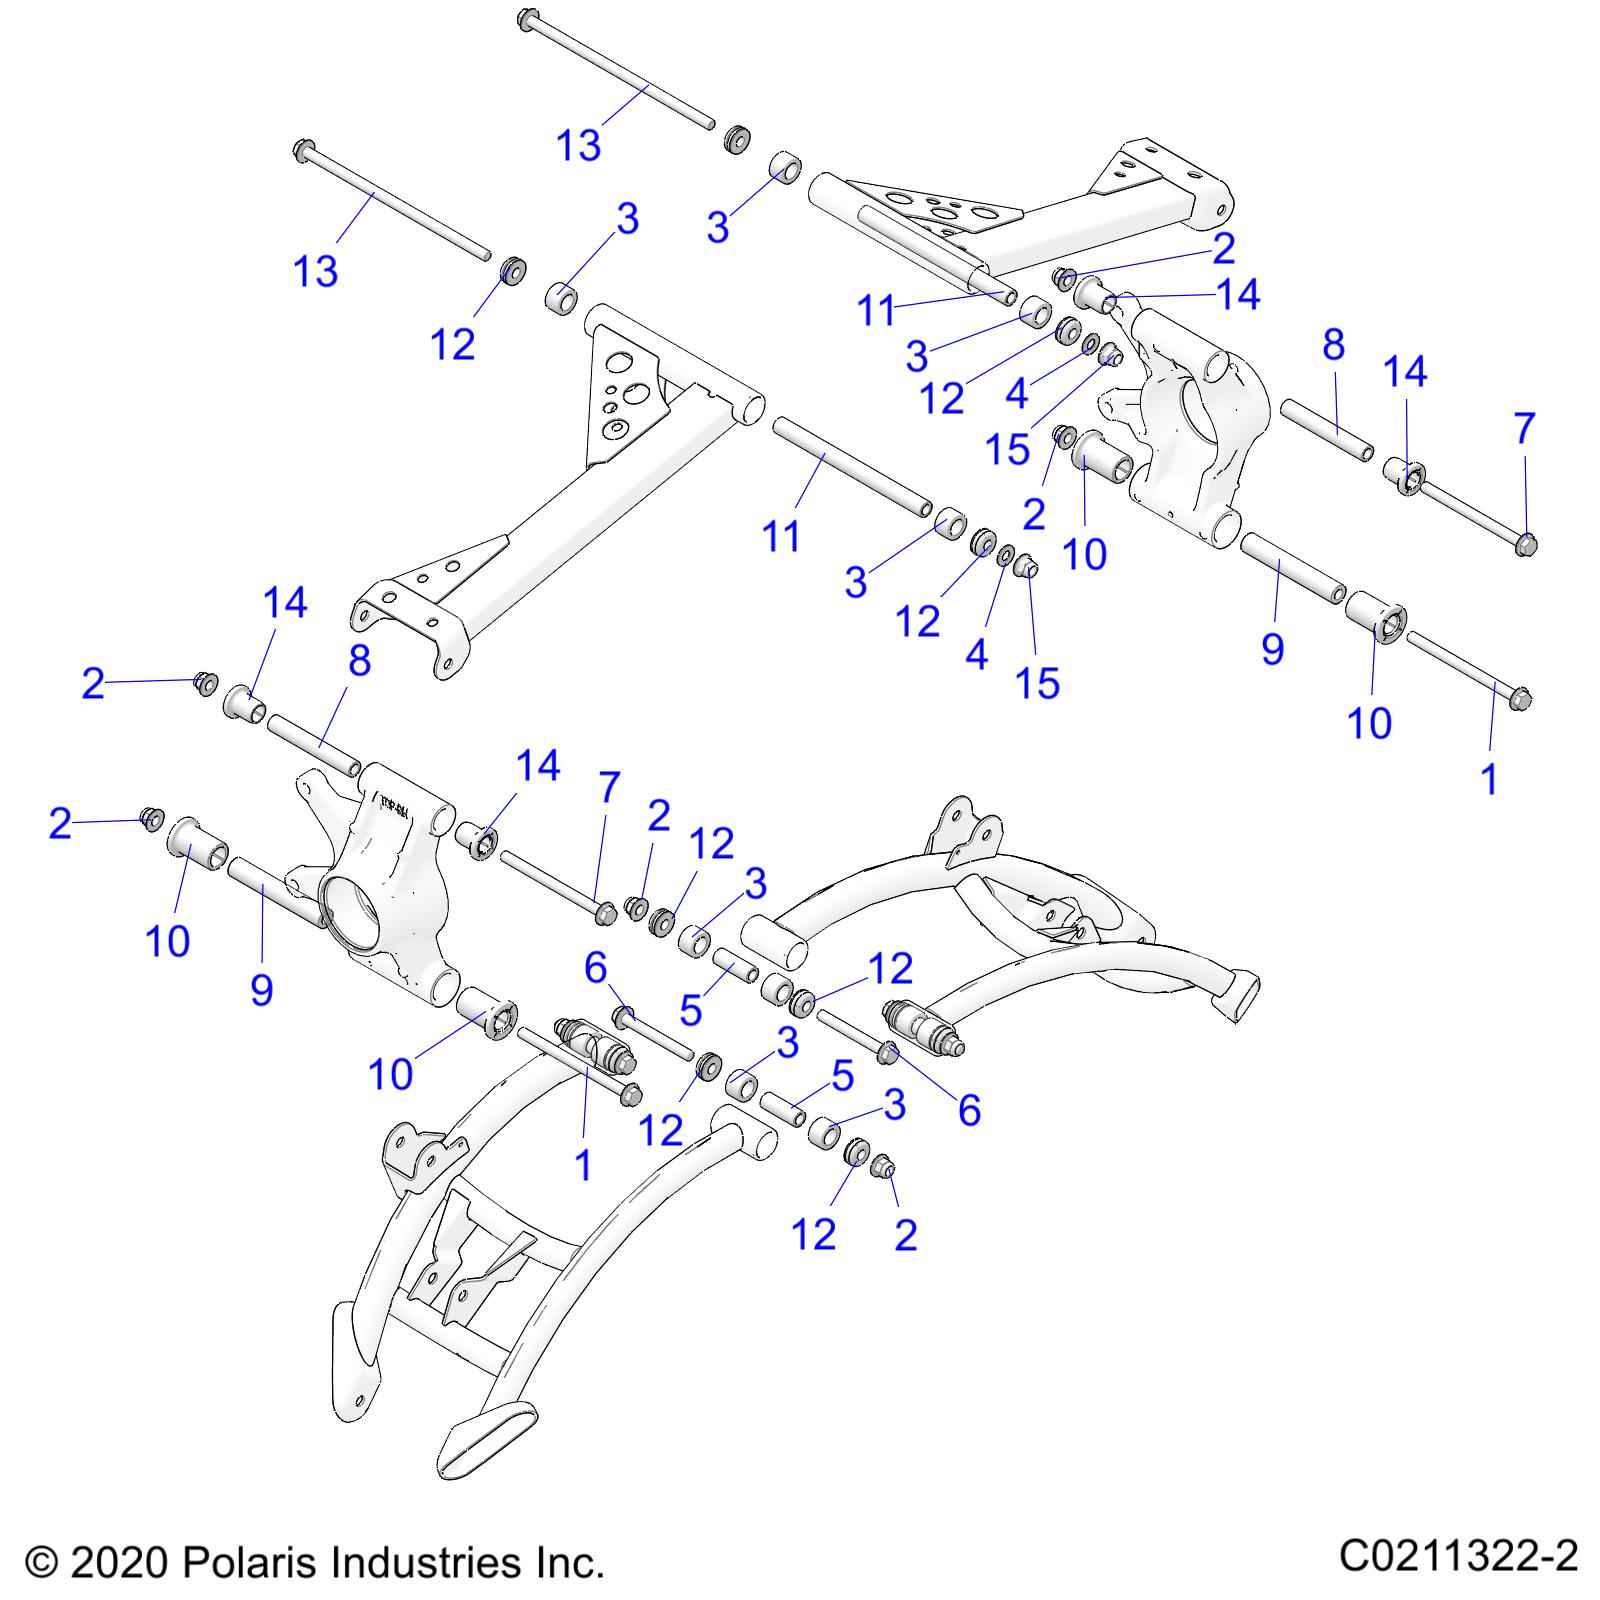 Part Number : 5437651 CONTROL ARM BUSHING  LOWER  .7